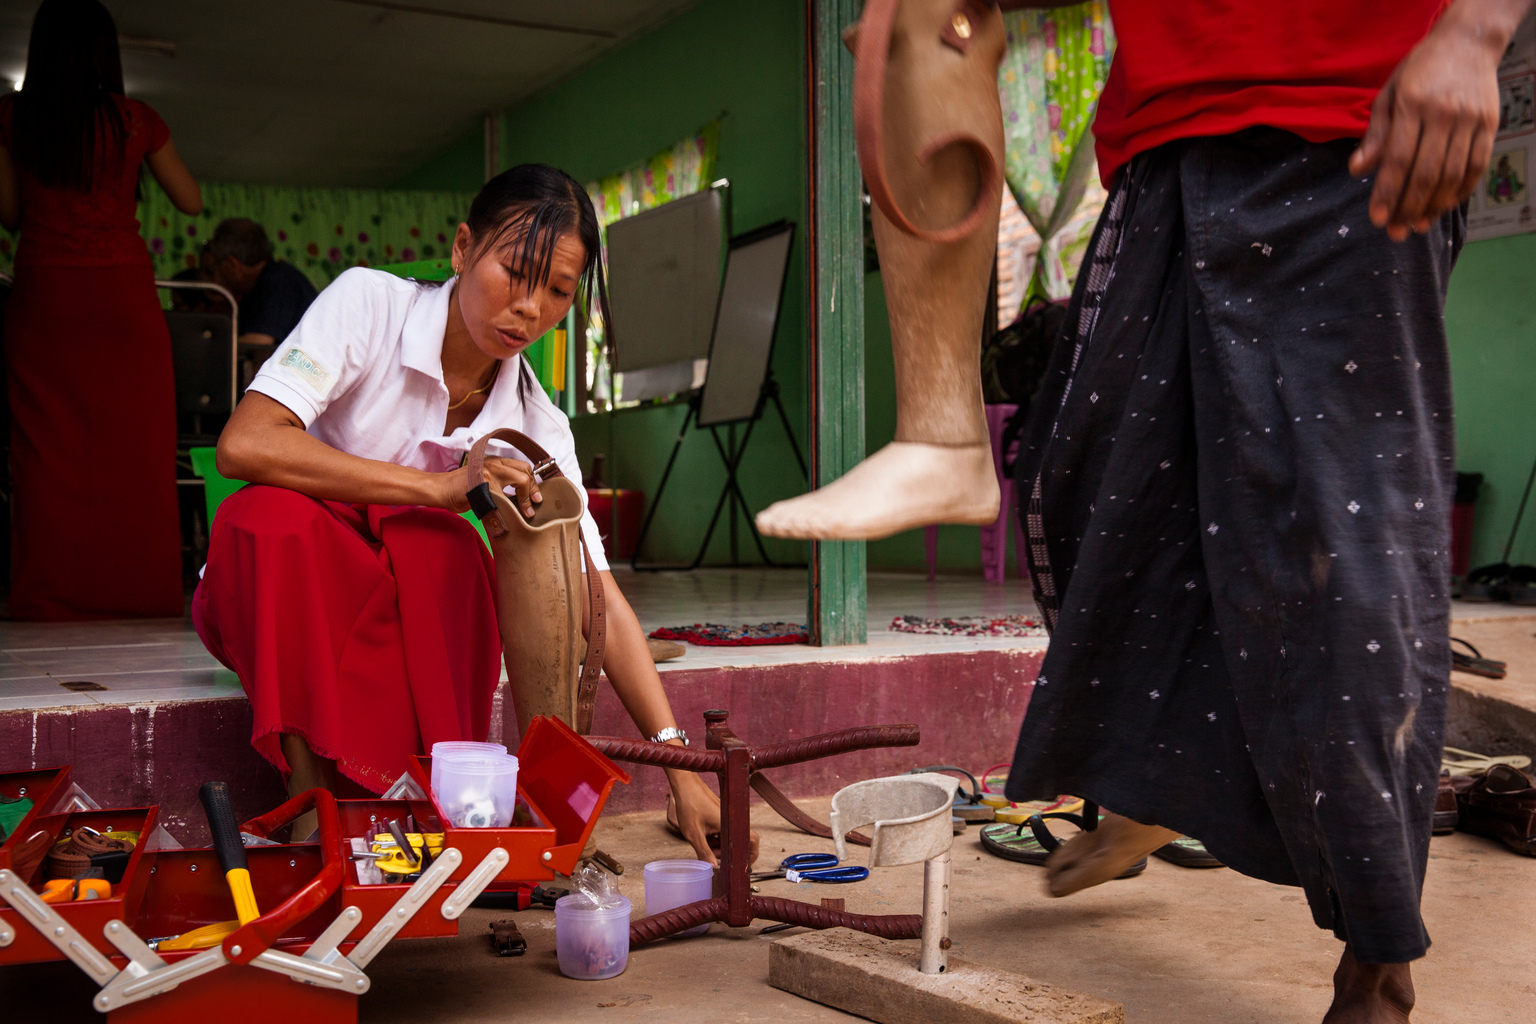 San San Maw, 33, (left) makes repairs to a prosthetic limb belonging to one of the centres customers at the Mine Victim Assistance Centre where she volunteers in Kawkareik, Kayin State, Myanmar, Sunday 2 April 2017. San San Maw is one of 30 volunteers working at the Centre. She lost her right leg when she trod on a landmine at the age of 13 while cutting bamboo on a mountain side. Here we do minor repairs and adjustments for people with prosthetic limbs, says Ms. Maw. But my main reason for volunteering is to give other victims encouragement in the same way I needed encouragement after my accident. According to Landmine Monitor, Myanmar has the third highest number of annual landmine casualties in the world, with an estimated 5 million residents currently living in areas clogged with the hidden weapons. In 2017, working with the Government of Myanmar, UNICEF will strive to meet the basic needs of the most vulnerable internally displaced children. Myanmar is experiencing three protracted humanitarian crises, each with its own set of complex underlying factors. In Rakhine State, inter-communal violence that erupted in 2012 continues to plague 120,000 internally displaced people spread across 40 camps or informal sites, as well as host communities. Eighty per cent of the displaced are women and children. In Kachin State, armed conflict that reignited in 2011 continues to impact communities caught in the crossfire between an ethnic armed group and the Myanmar army. Nearly 87,000 people remain displaced as a result, including 40 per cent who are in areas outside of government control. An additional 11,000 people remain displaced in northern Shan State, where a similar conflict oke out in 2011. Compounding the protracted crises are issues related to religious and/or ethnic discrimination, exploitation, chronic poverty, vulnerability to natural disasters, statelessness, trafficking and humanitarian access. In addition to the humanitarian crises in Rakhi